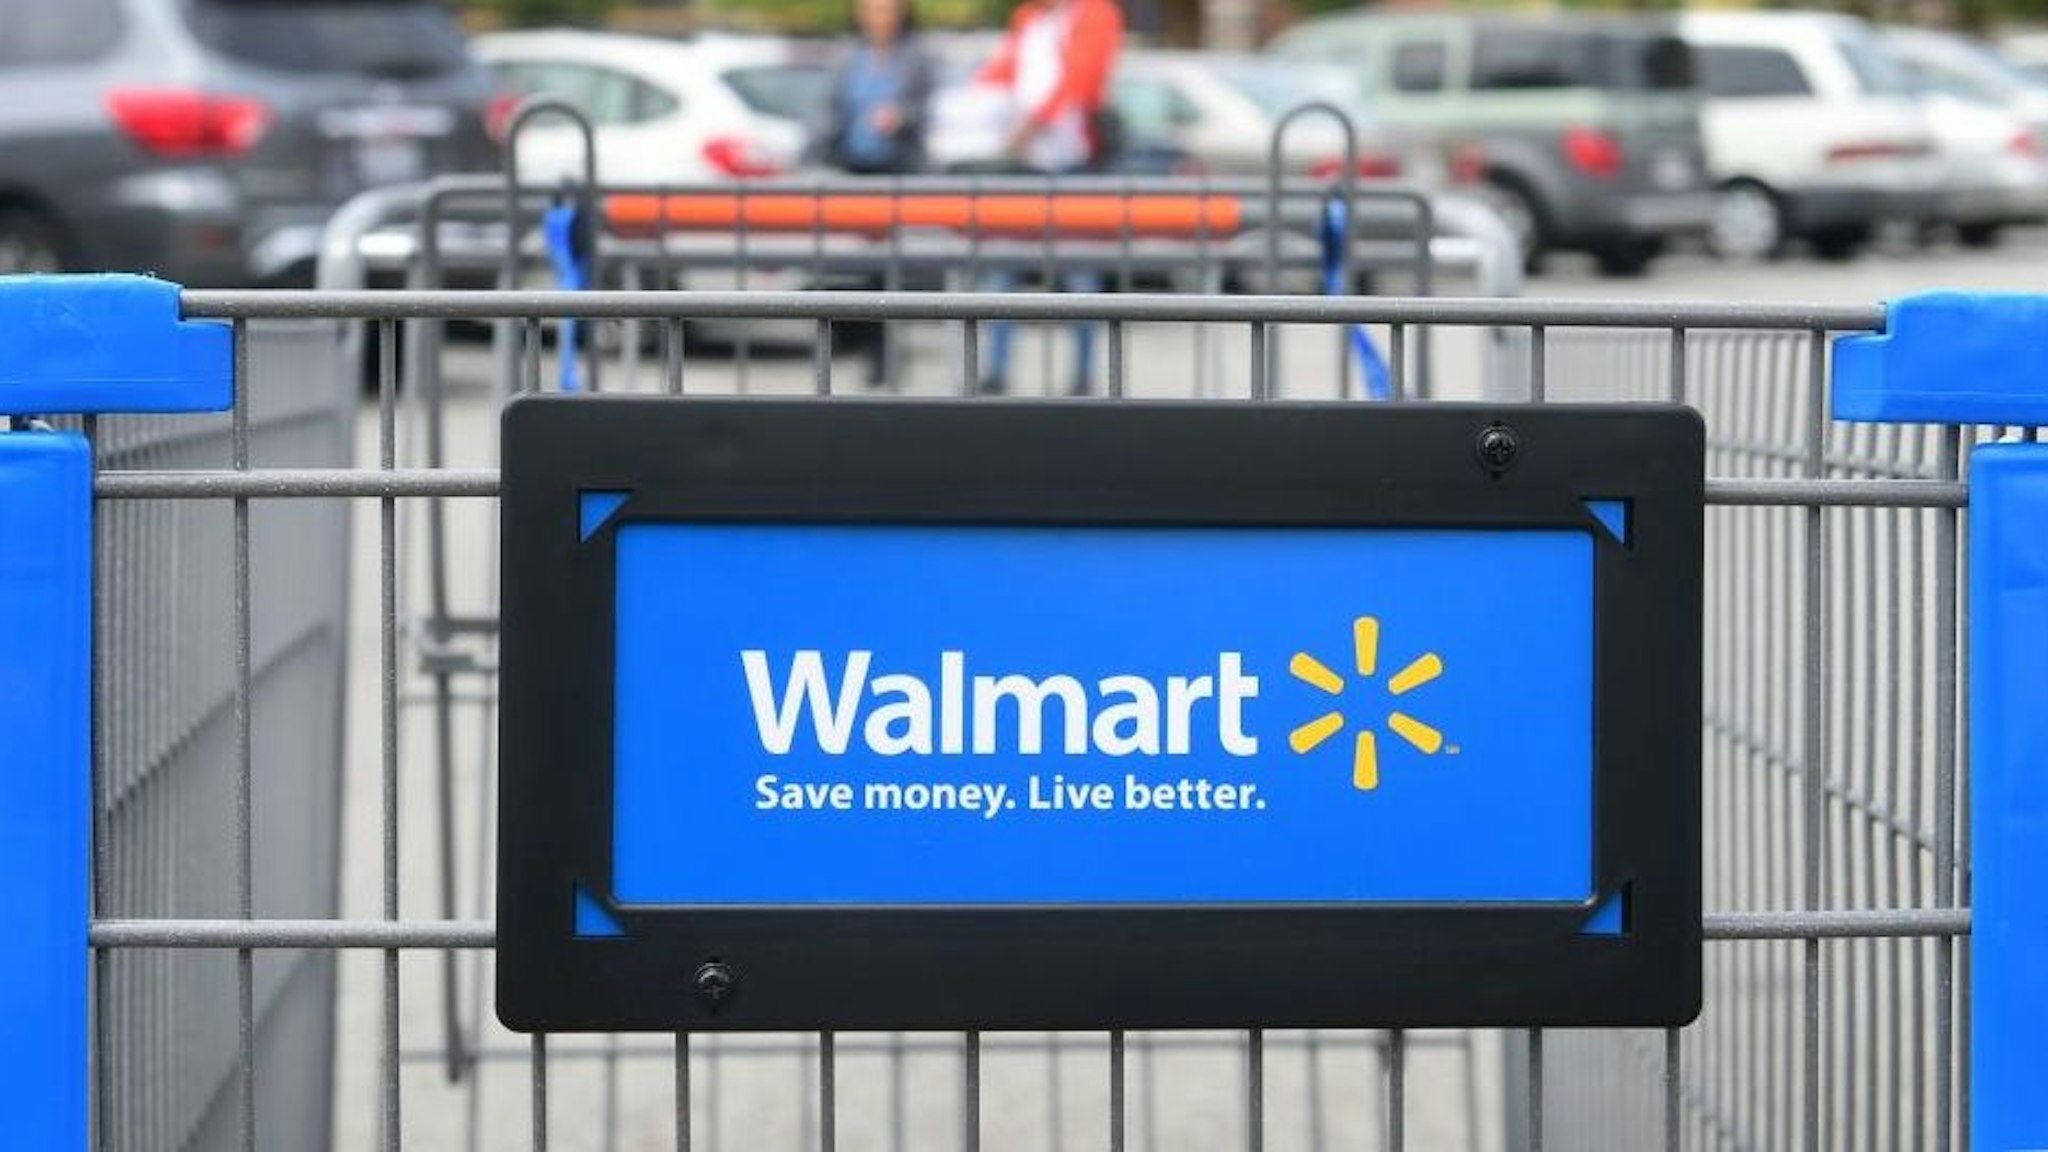 Shoppers carry their goods past a shopping cart in the parking lot of a Walmart Supercenter in Rosemead, California on May 23, 2019. - Walmart has said it will raise prices as a result of the Trump administration's tariffs on Chinese-made goods as the trade war is about to take a bite into the retail sector affecting consumers shopping at stores like Walmart, Target and Macy's.